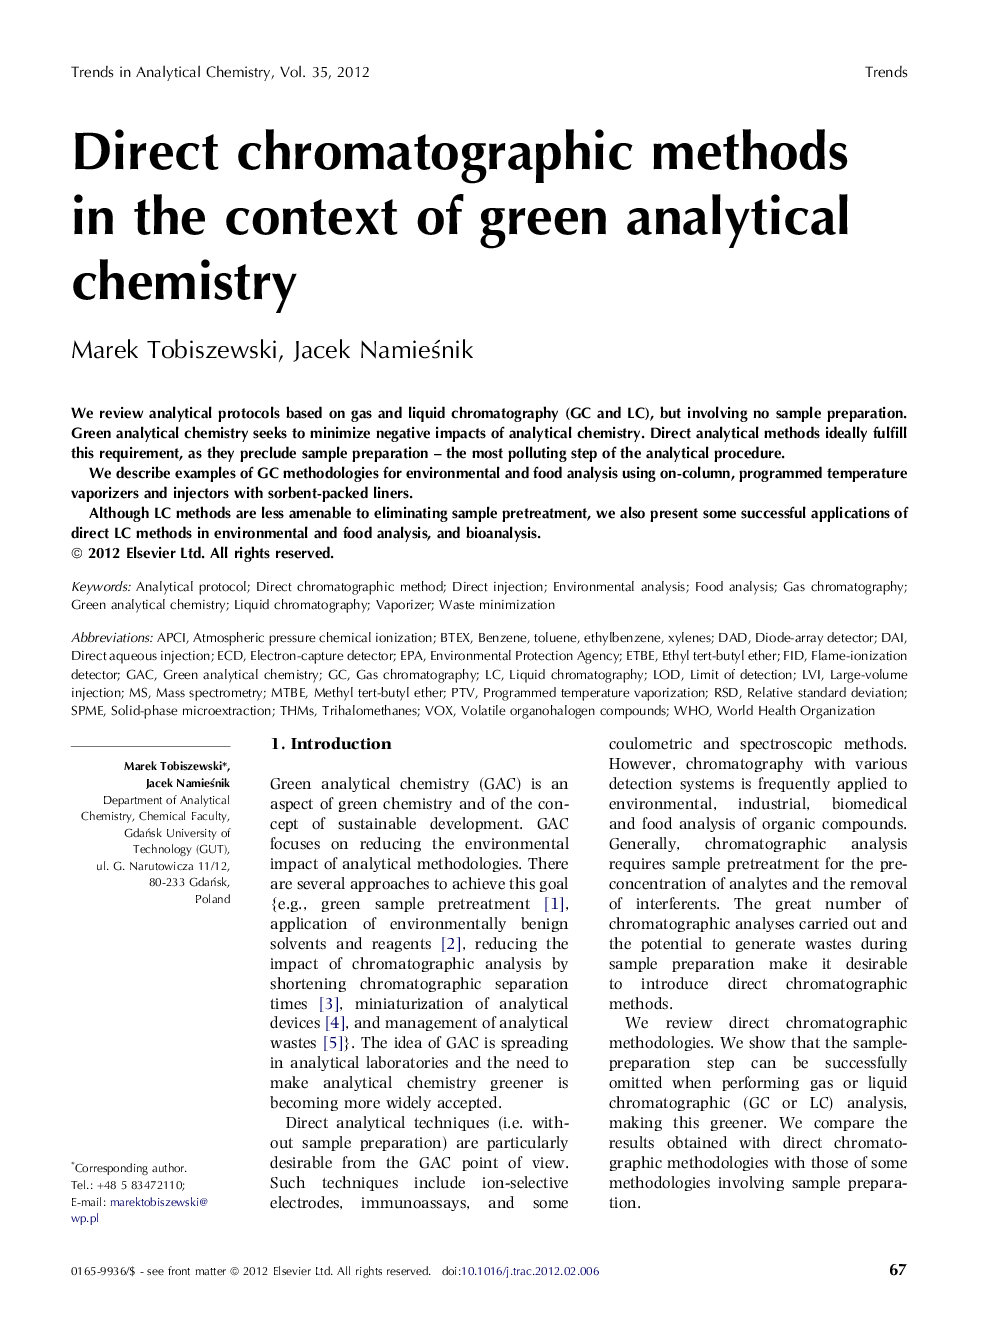 Direct chromatographic methods in the context of green analytical chemistry